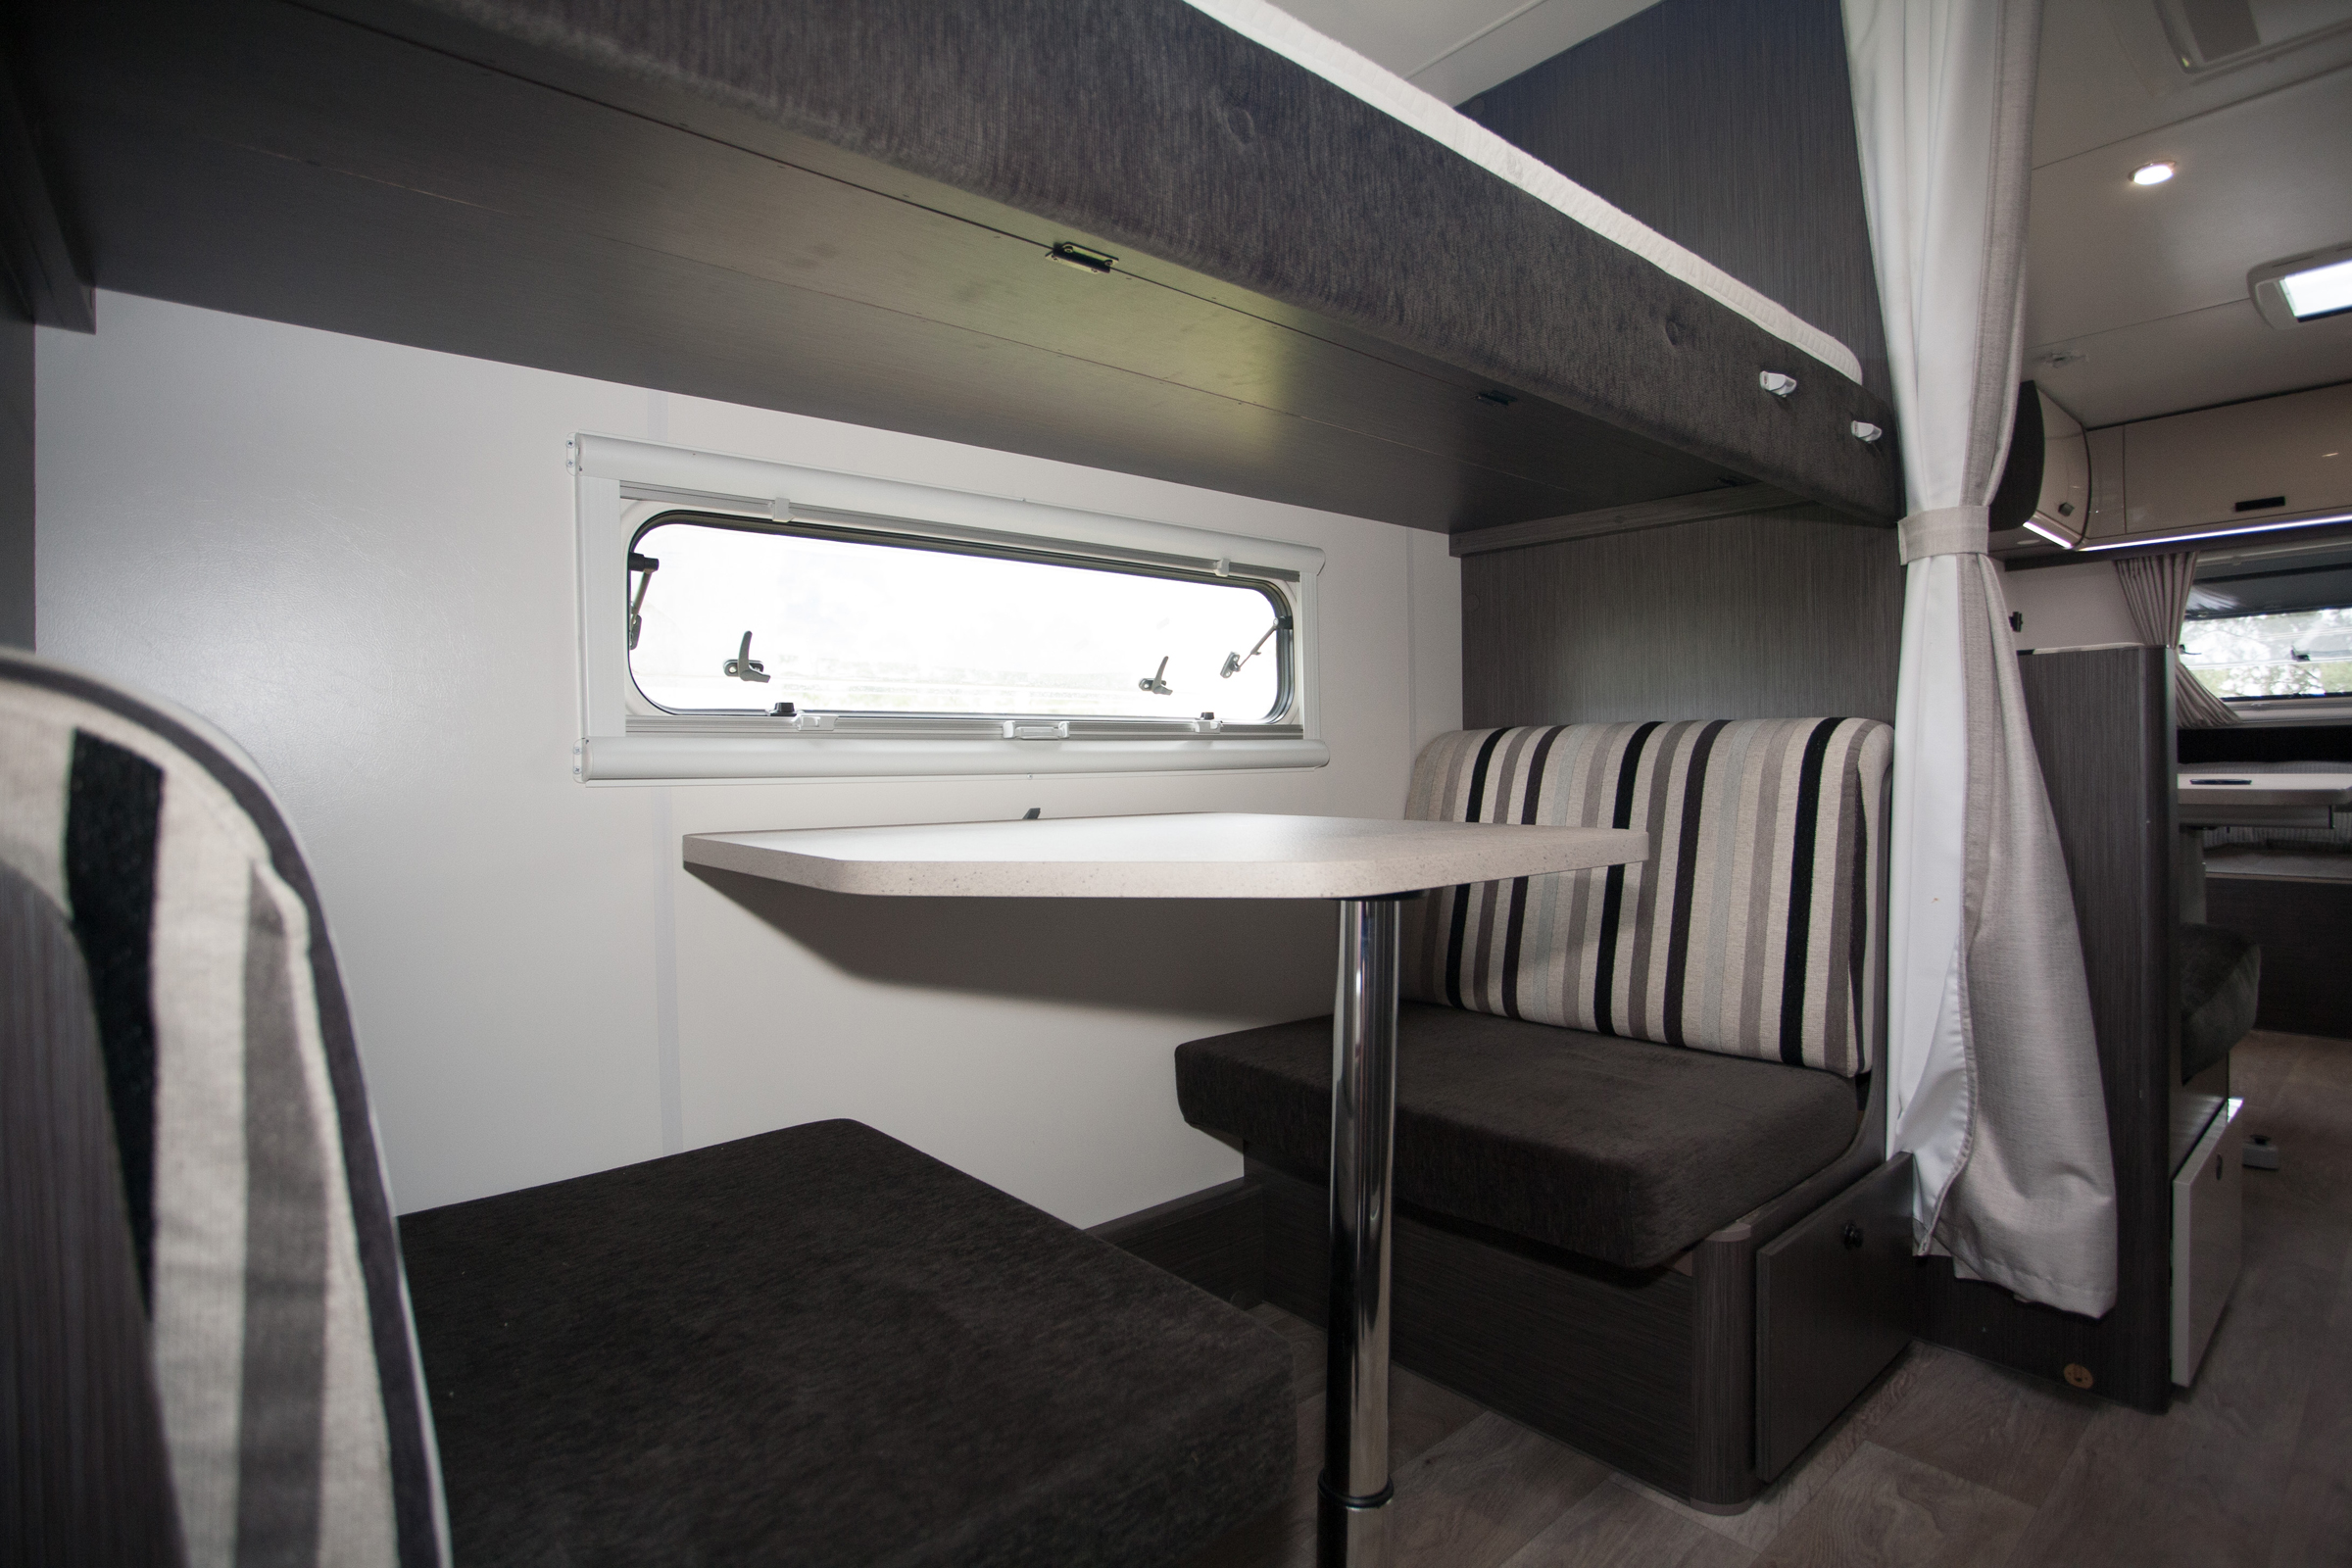 The lower wall bunk converts into a two person dinette